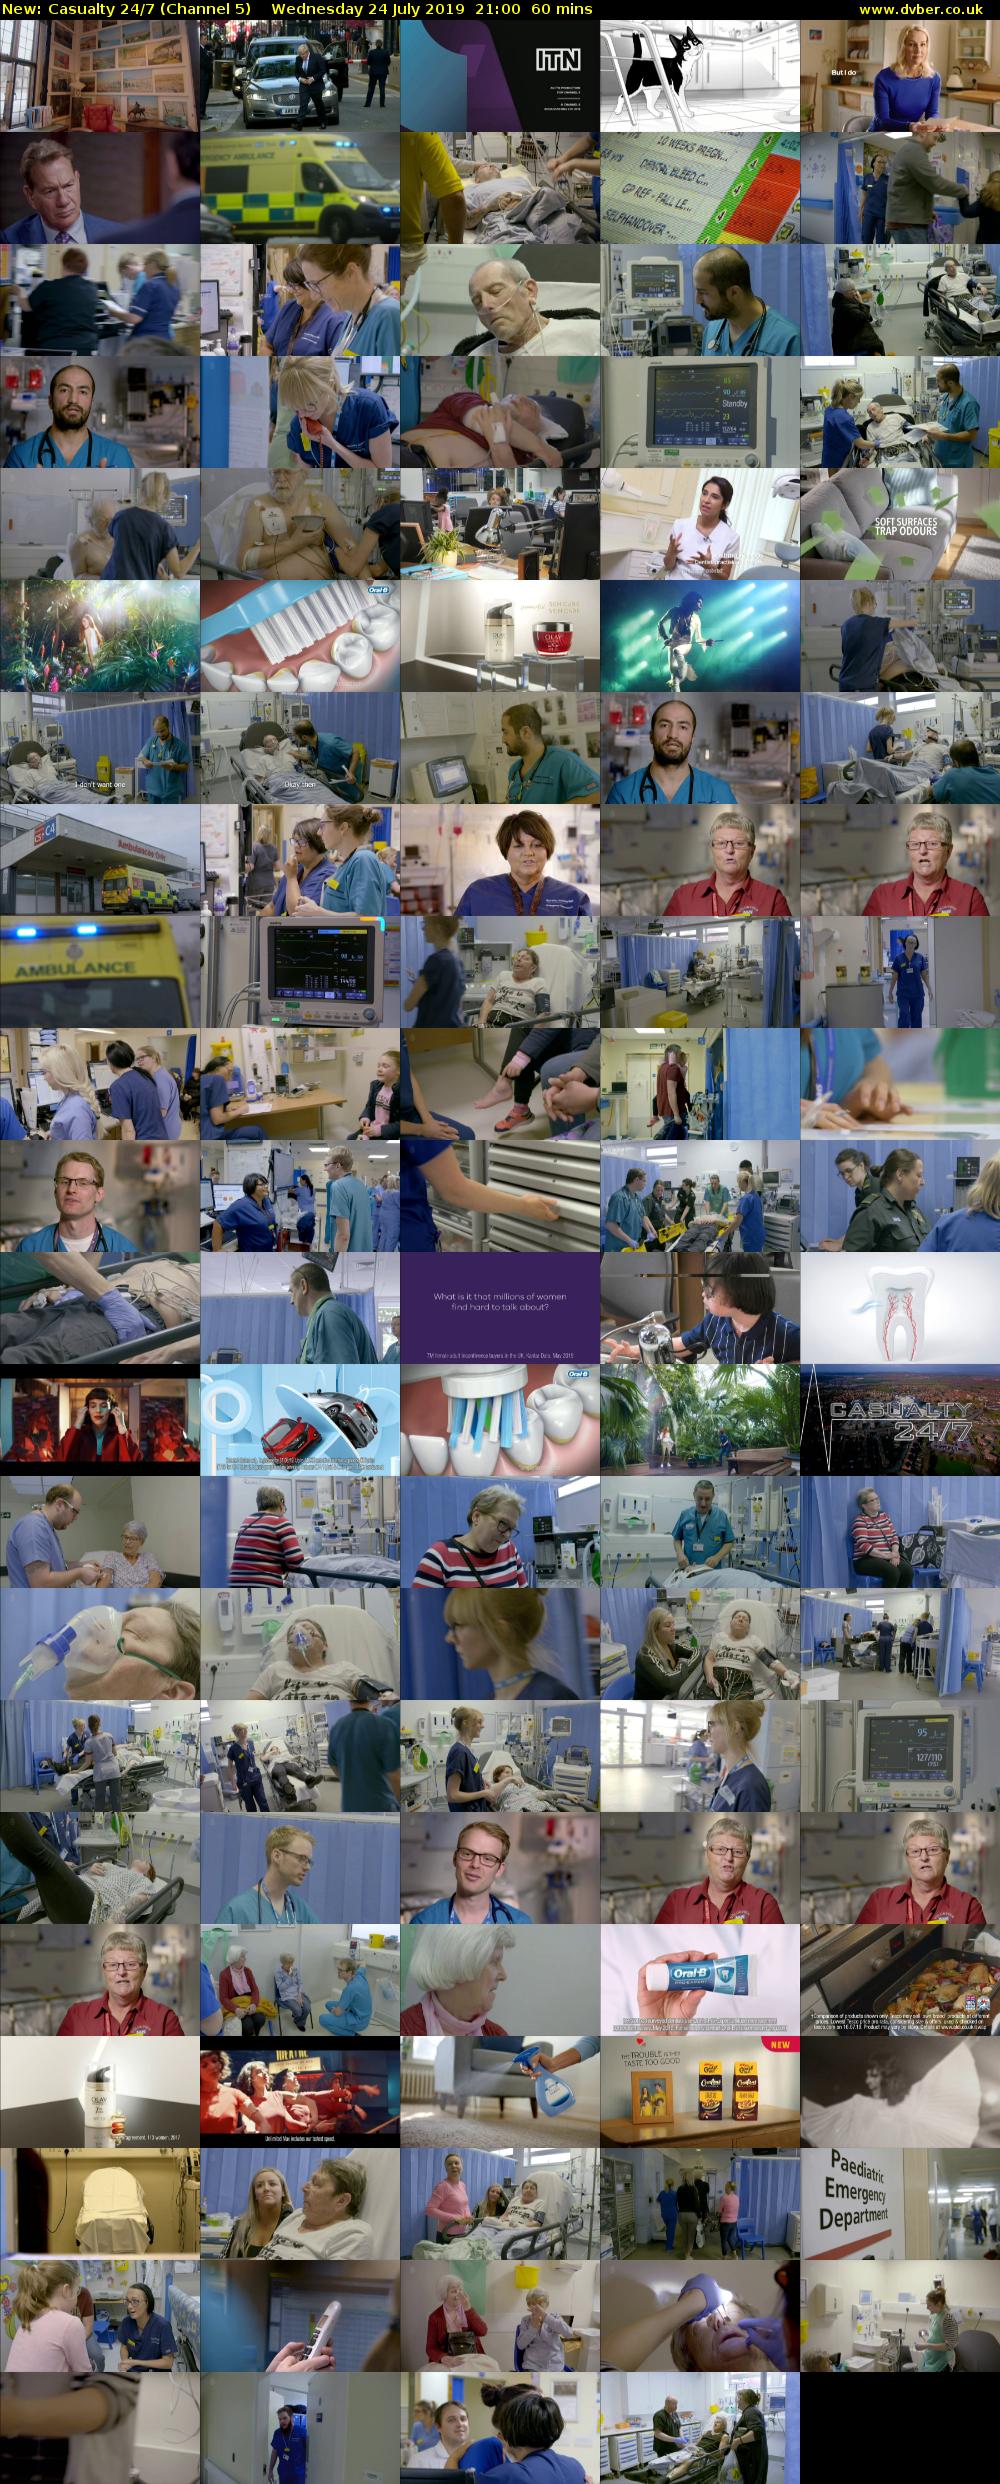 Casualty 24/7 (Channel 5) Wednesday 24 July 2019 21:00 - 22:00